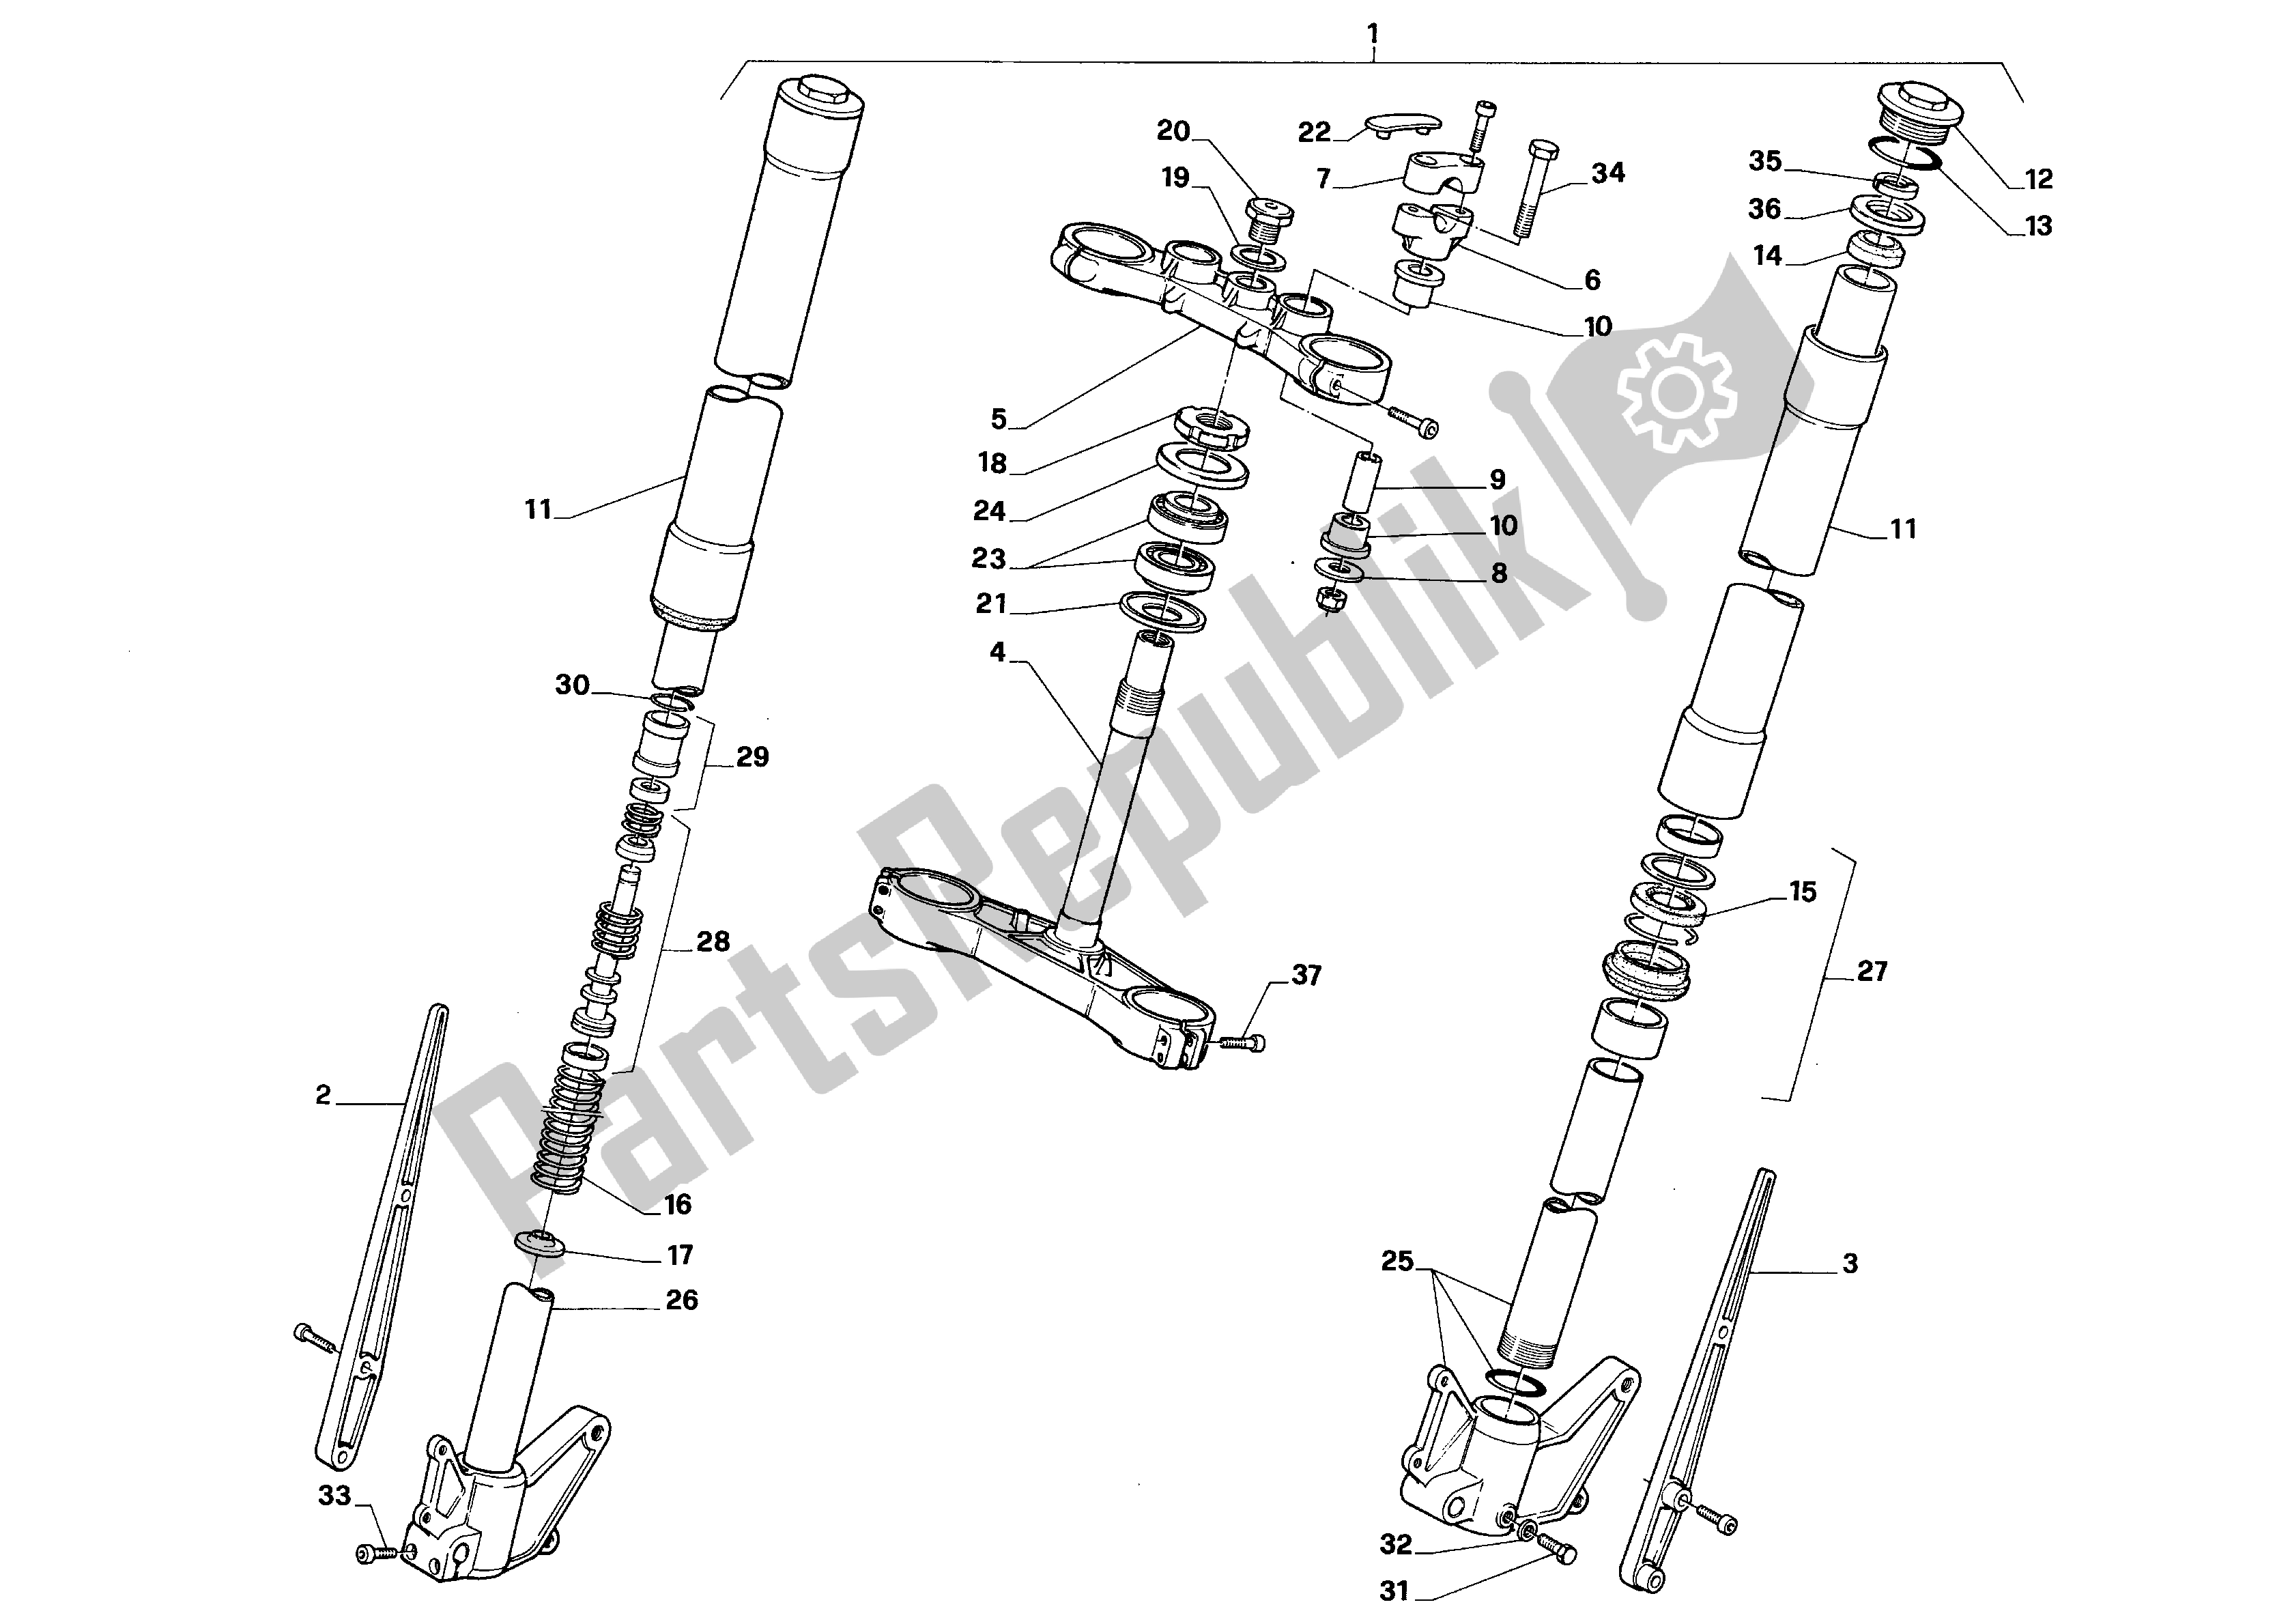 All parts for the Front Fork of the Aprilia Tuareg 600 1989 - 1990